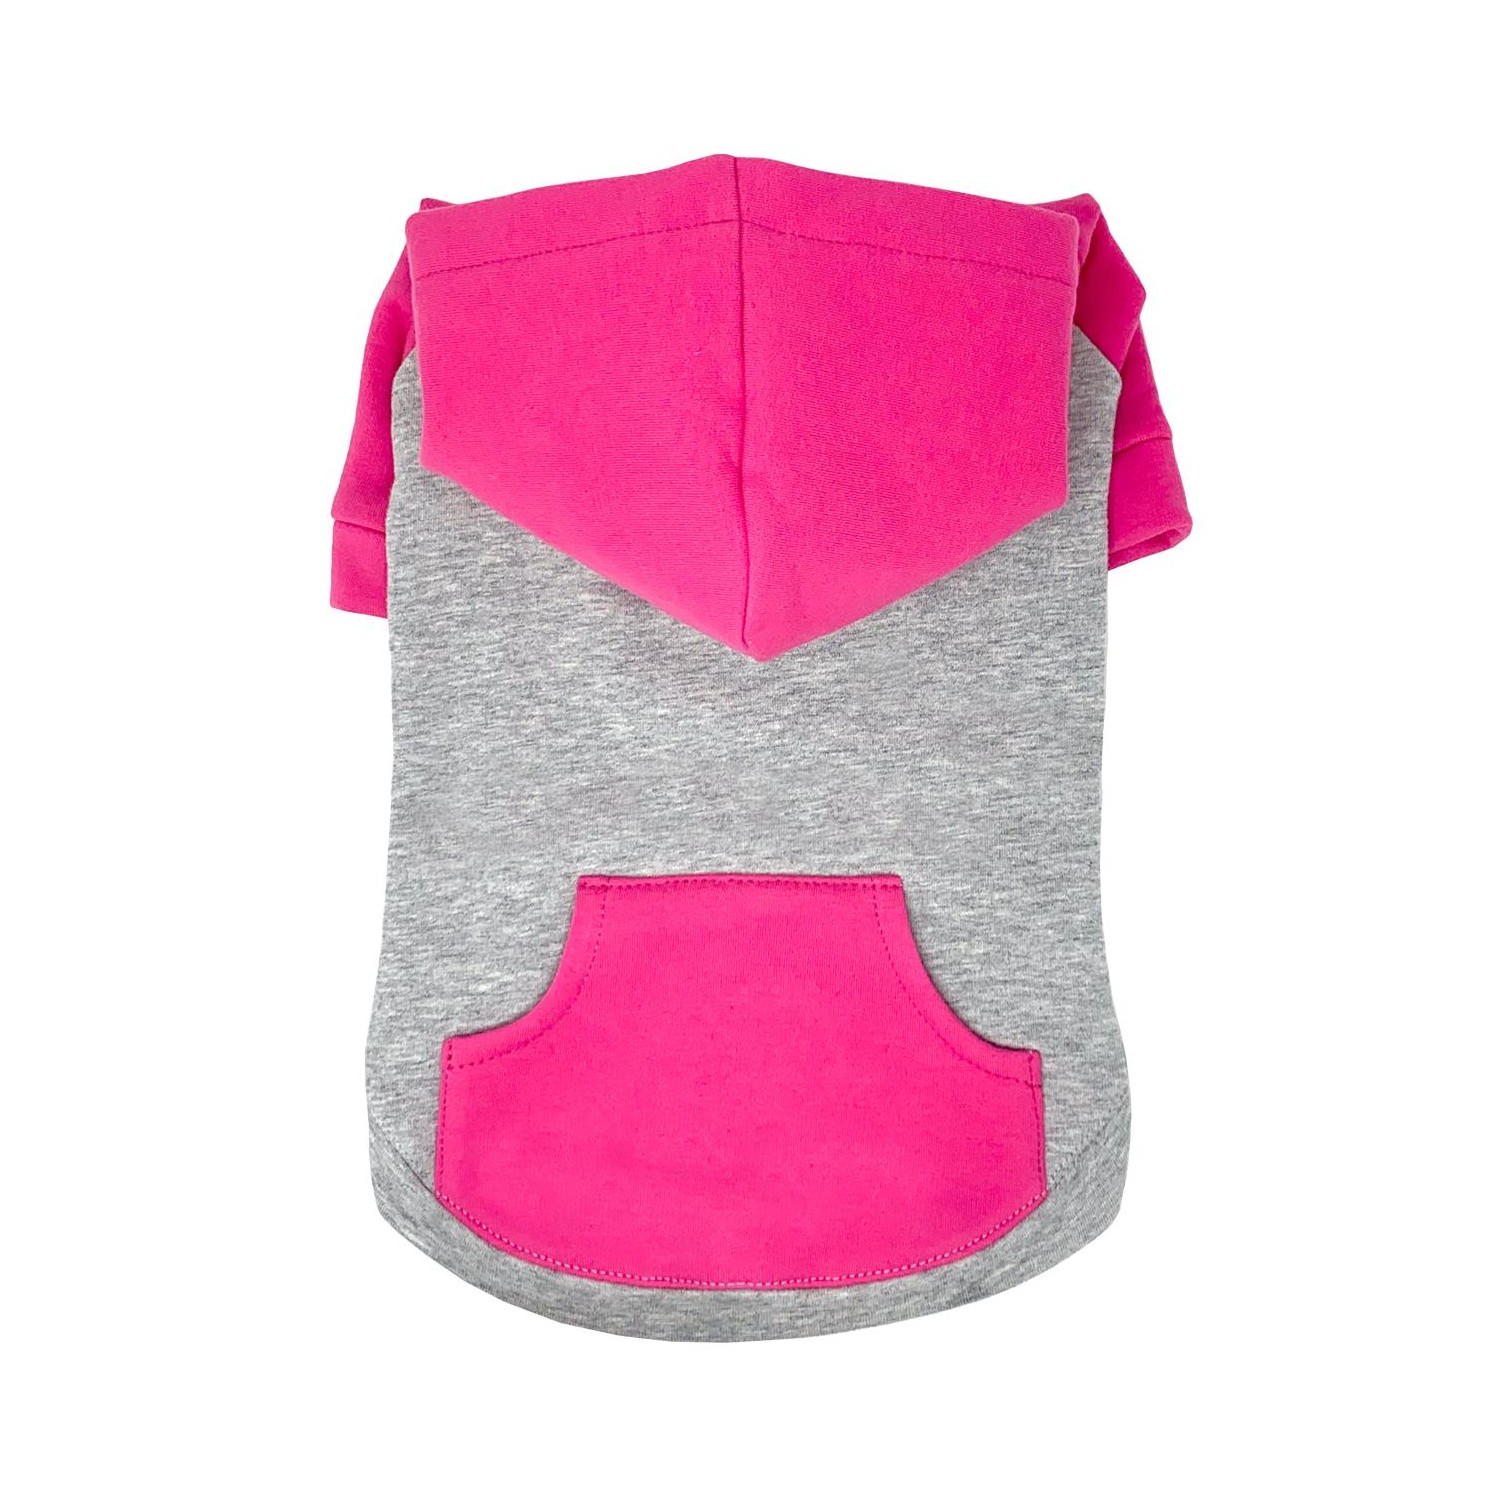 Flex-Fit Color-Block Dog Hoodie by Doggie Design - Pink on Gray